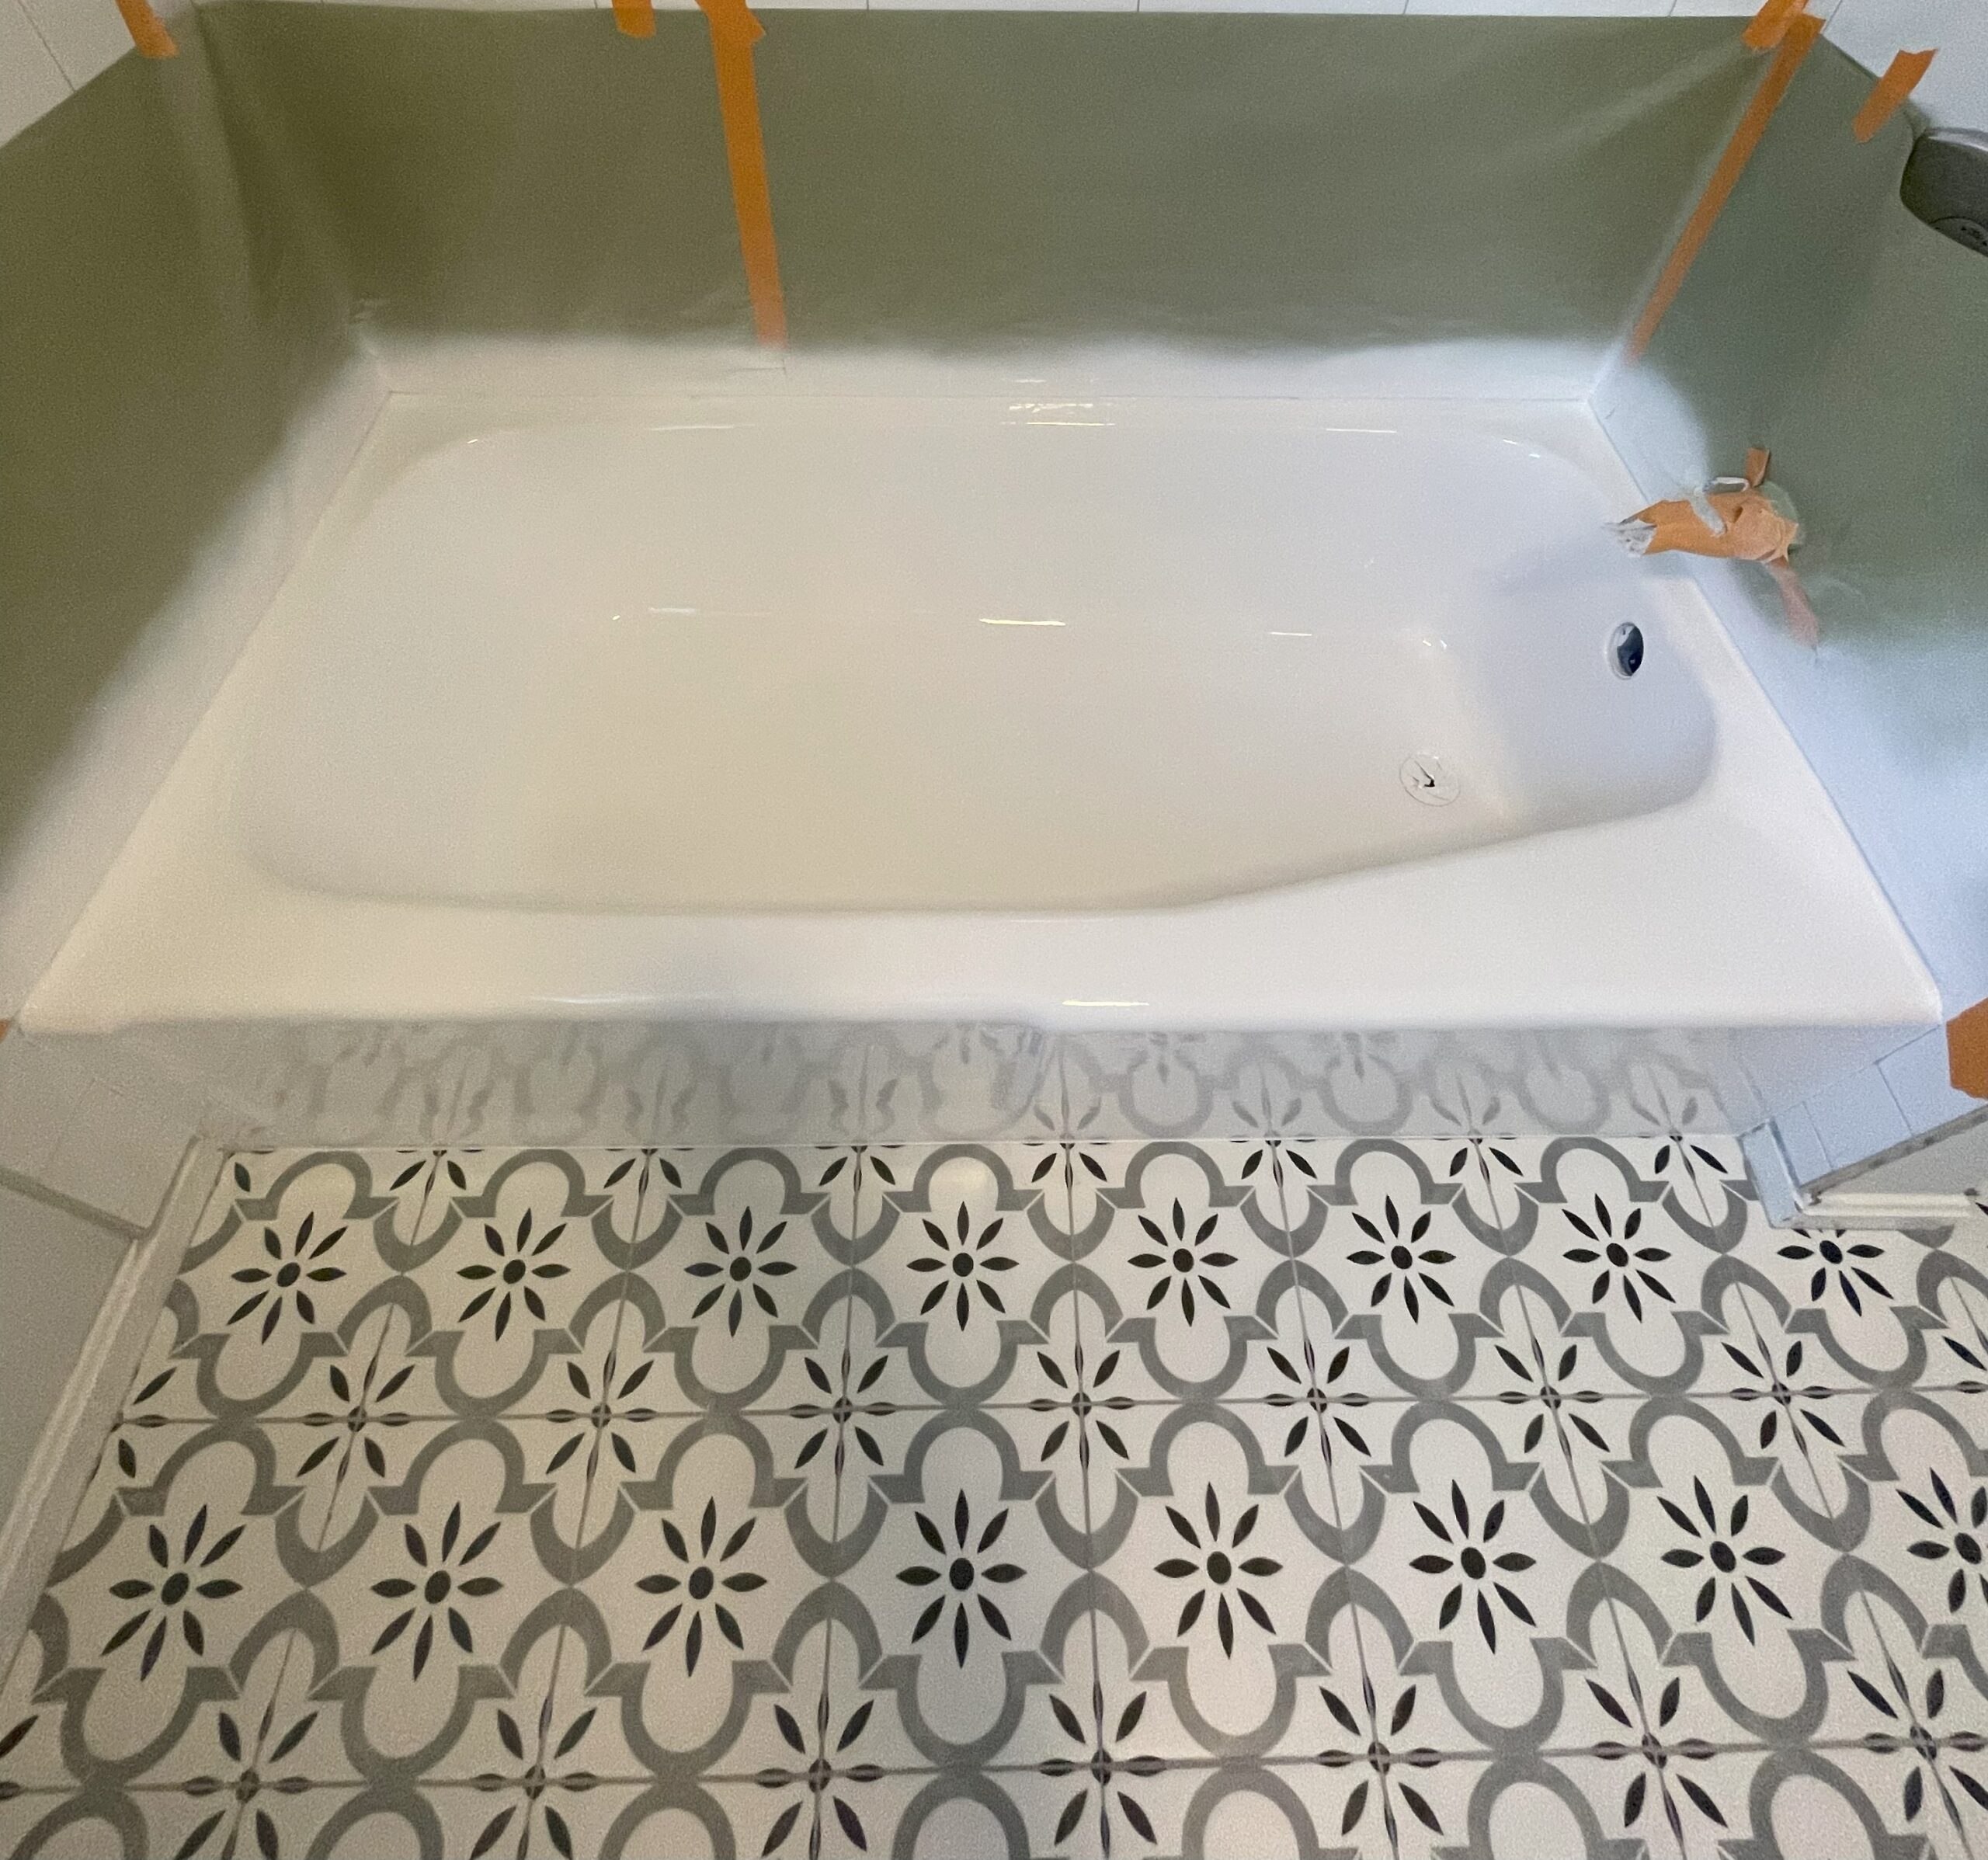 Finished tub tile croped pattened floor